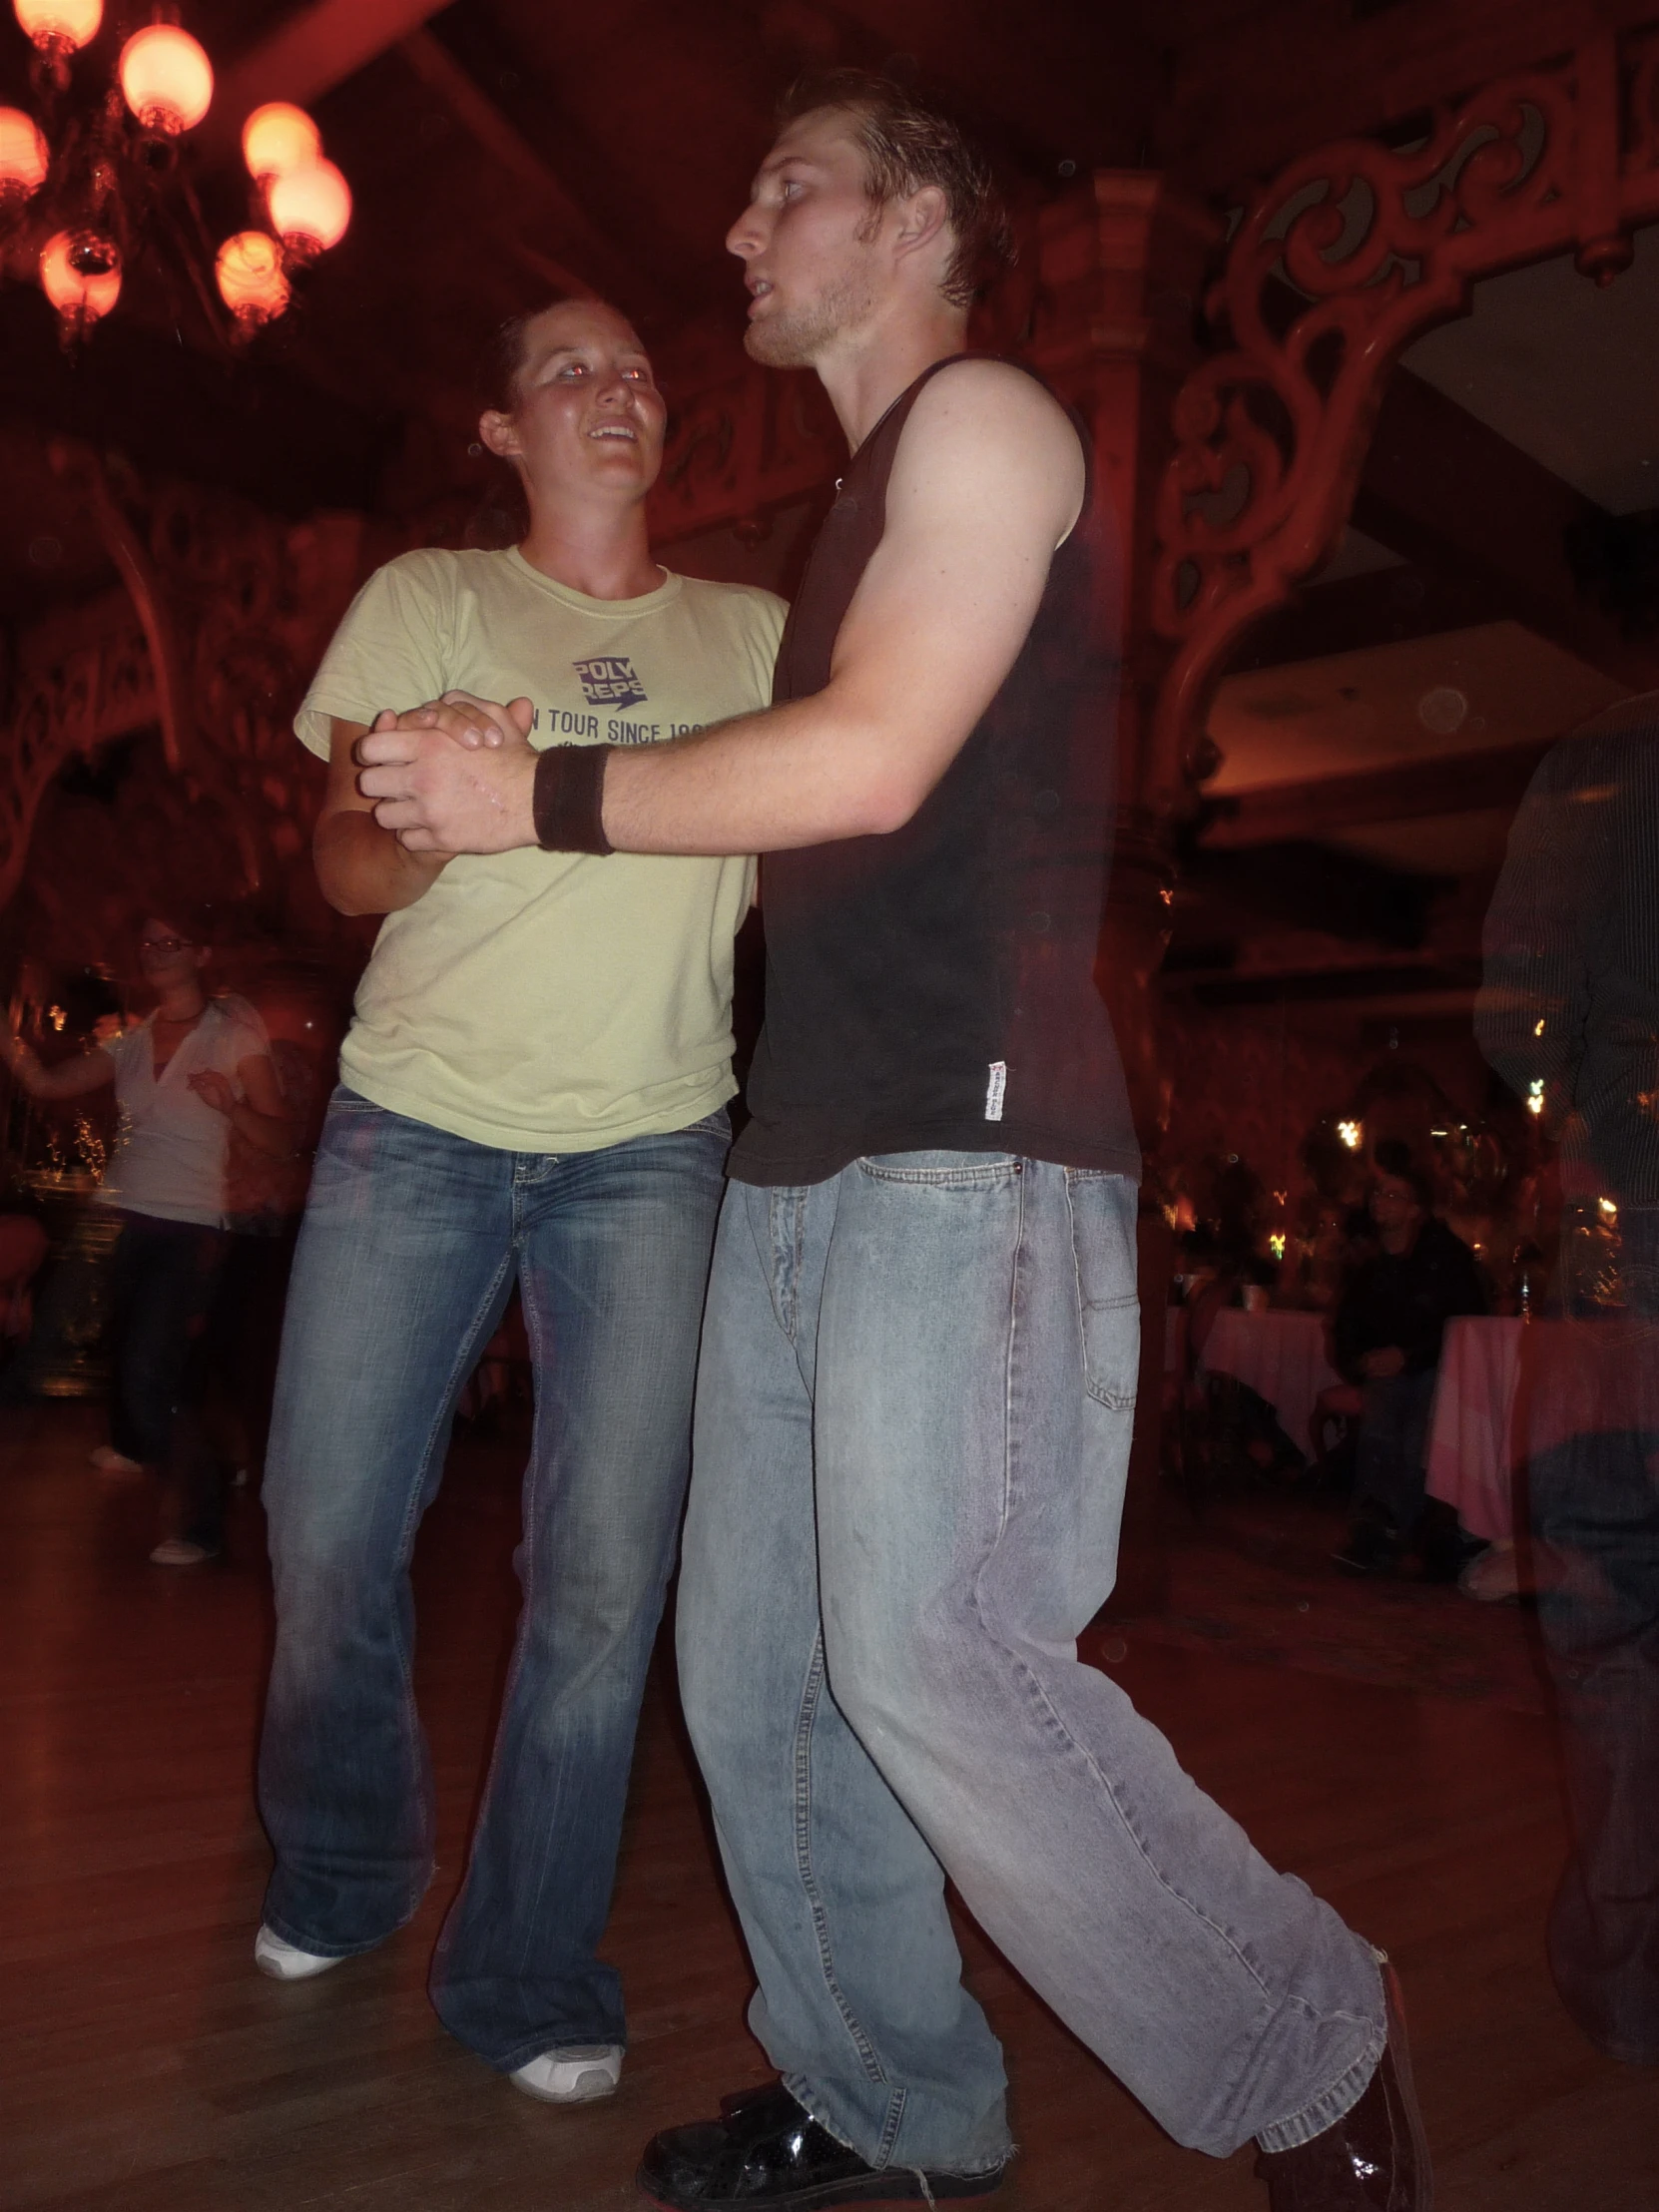 two people with jeans and a tan shirt are dancing